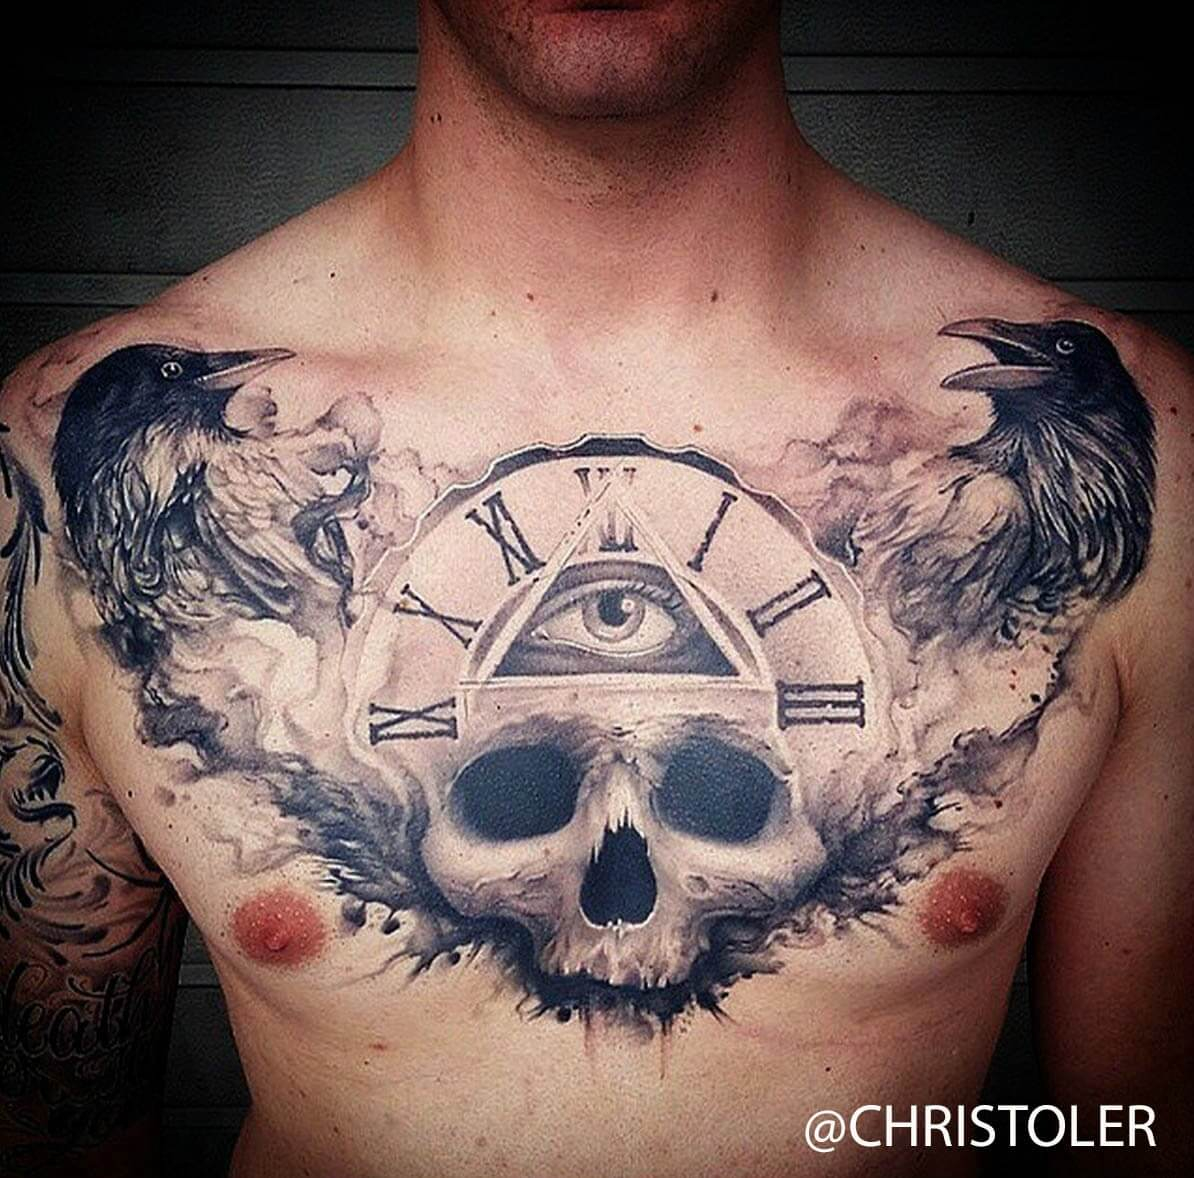 The 100 Best Chest Tattoos For Men Improb inside dimensions 1194 X 1178